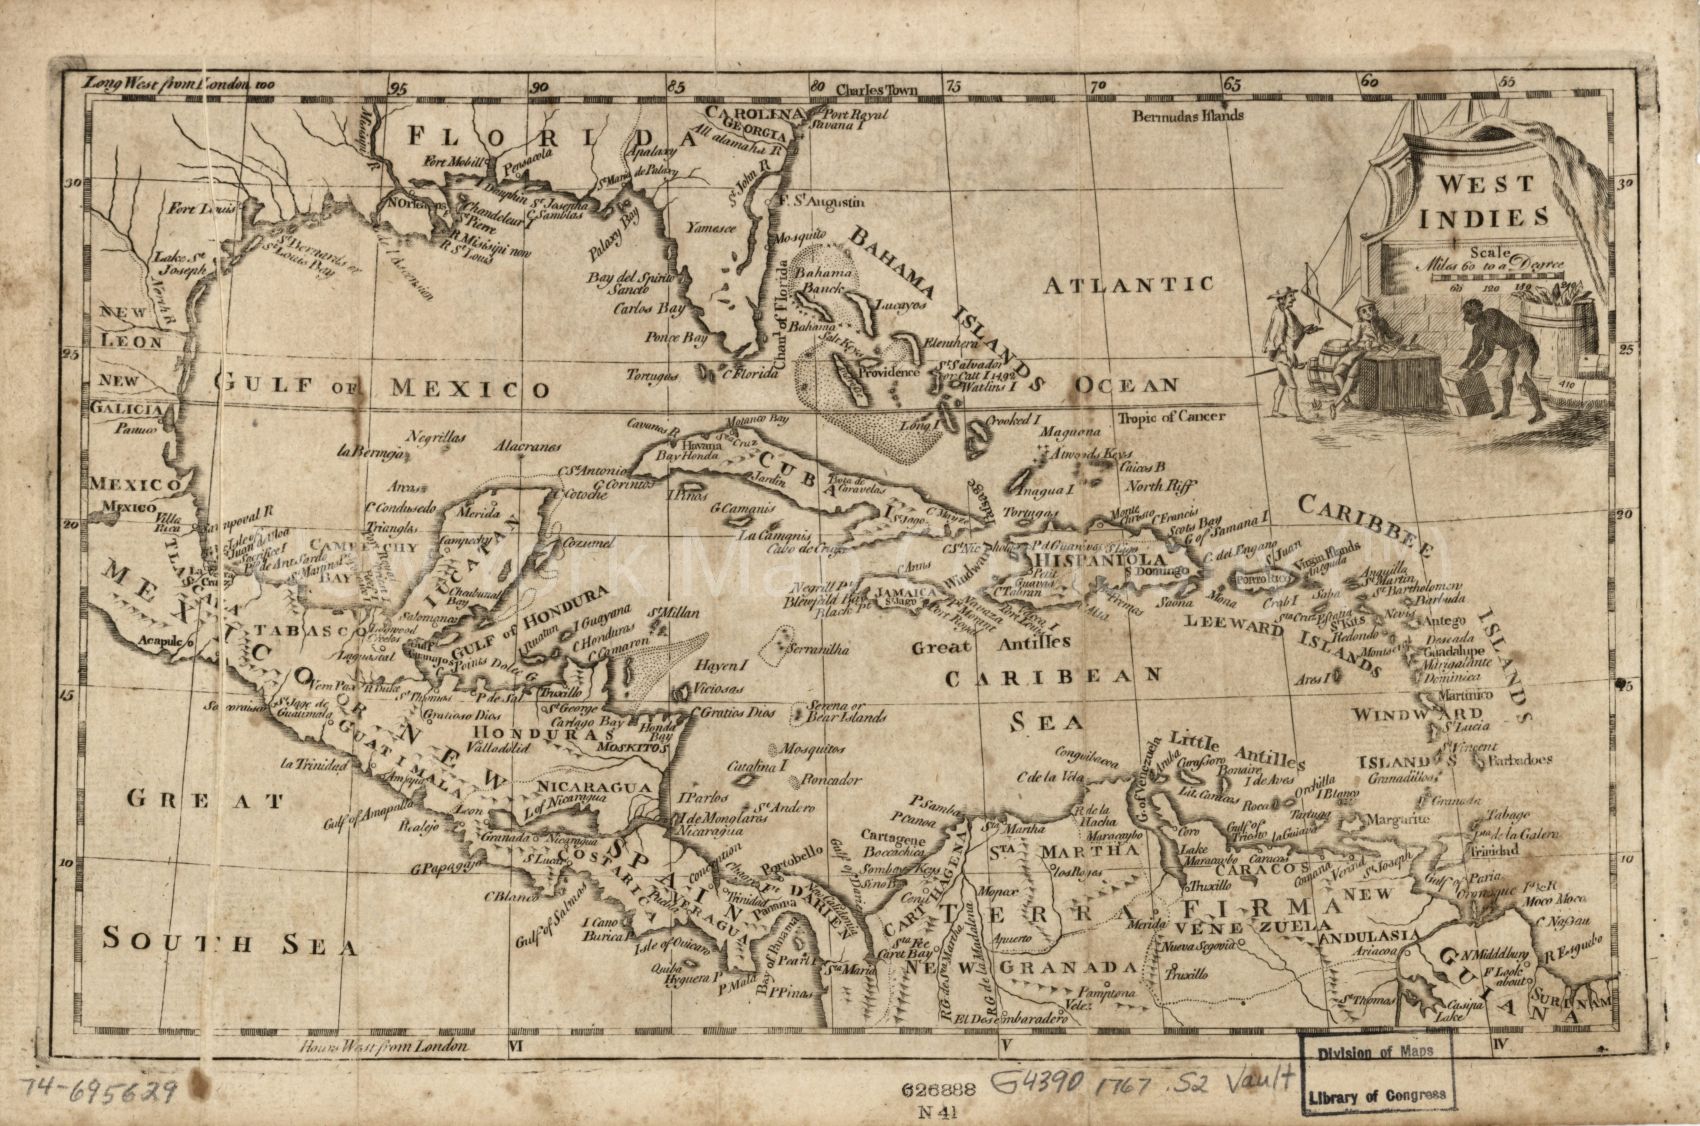 1767 map West Indies. Map Subjects: Caribbean Area | Early West Indies - New York Map Company